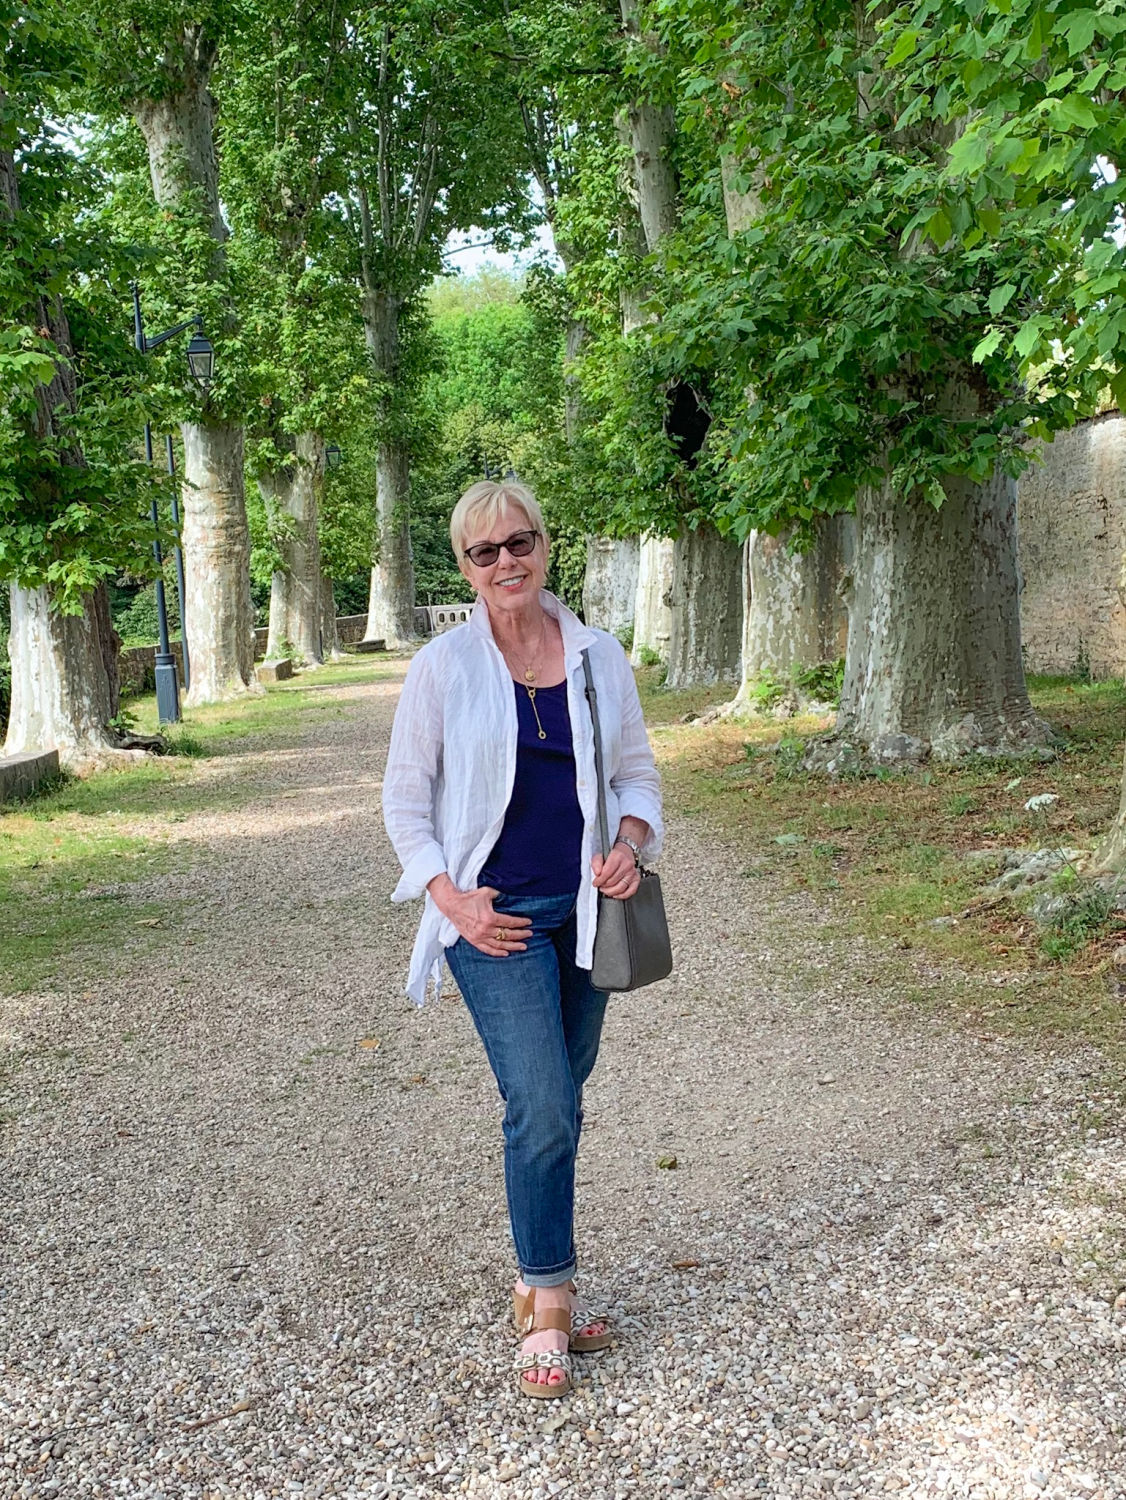 Susan B of une femme d'un certain age wears jeans, a white shirt and sandals for sightseeing in Beaune.